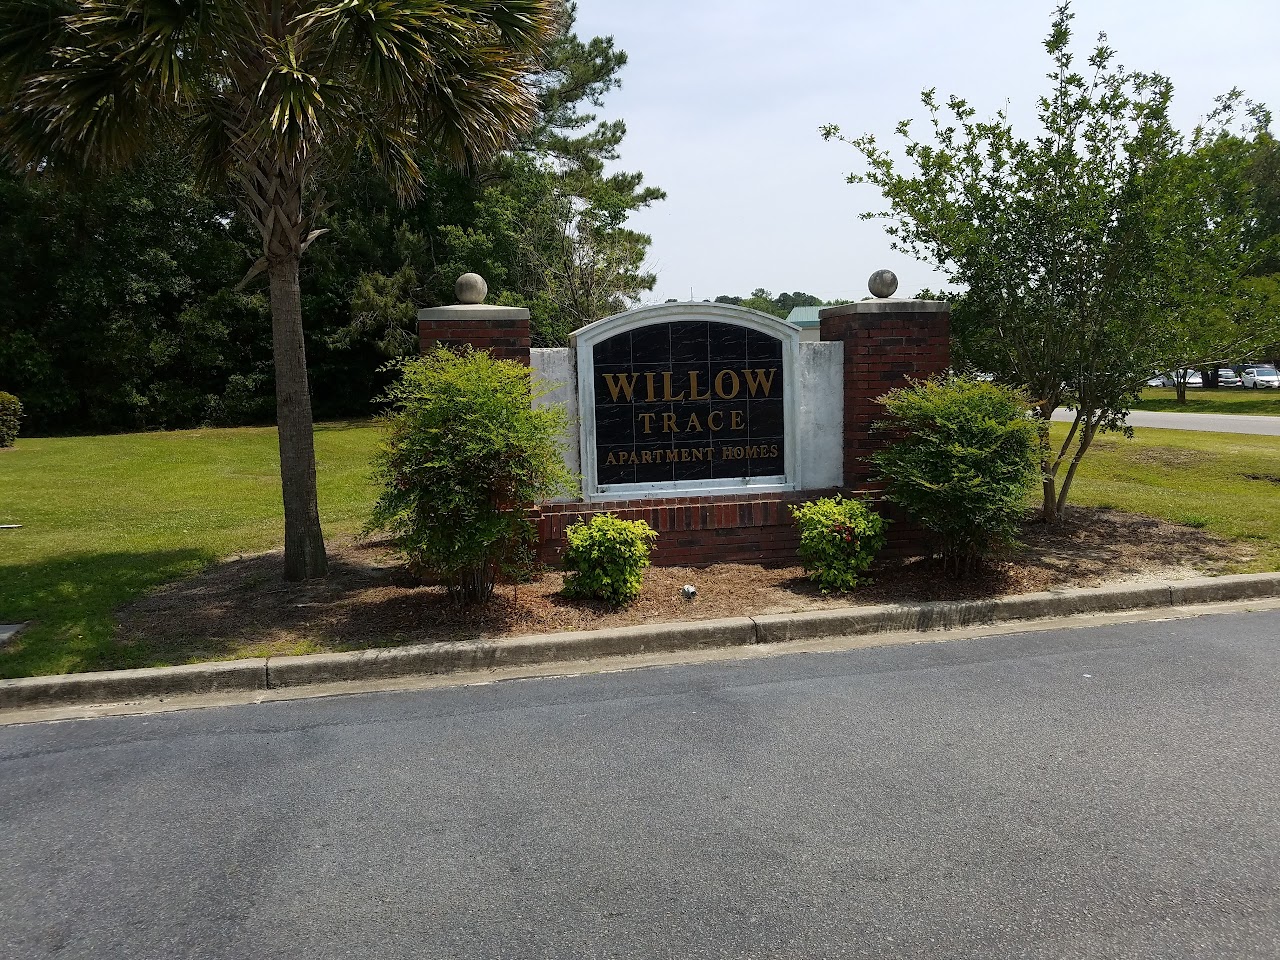 Photo of WILLOW TRACE AT WINDSOR HILL. Affordable housing located at 8184 WINDSOR HILL BLVD N CHARLESTON, SC 29420